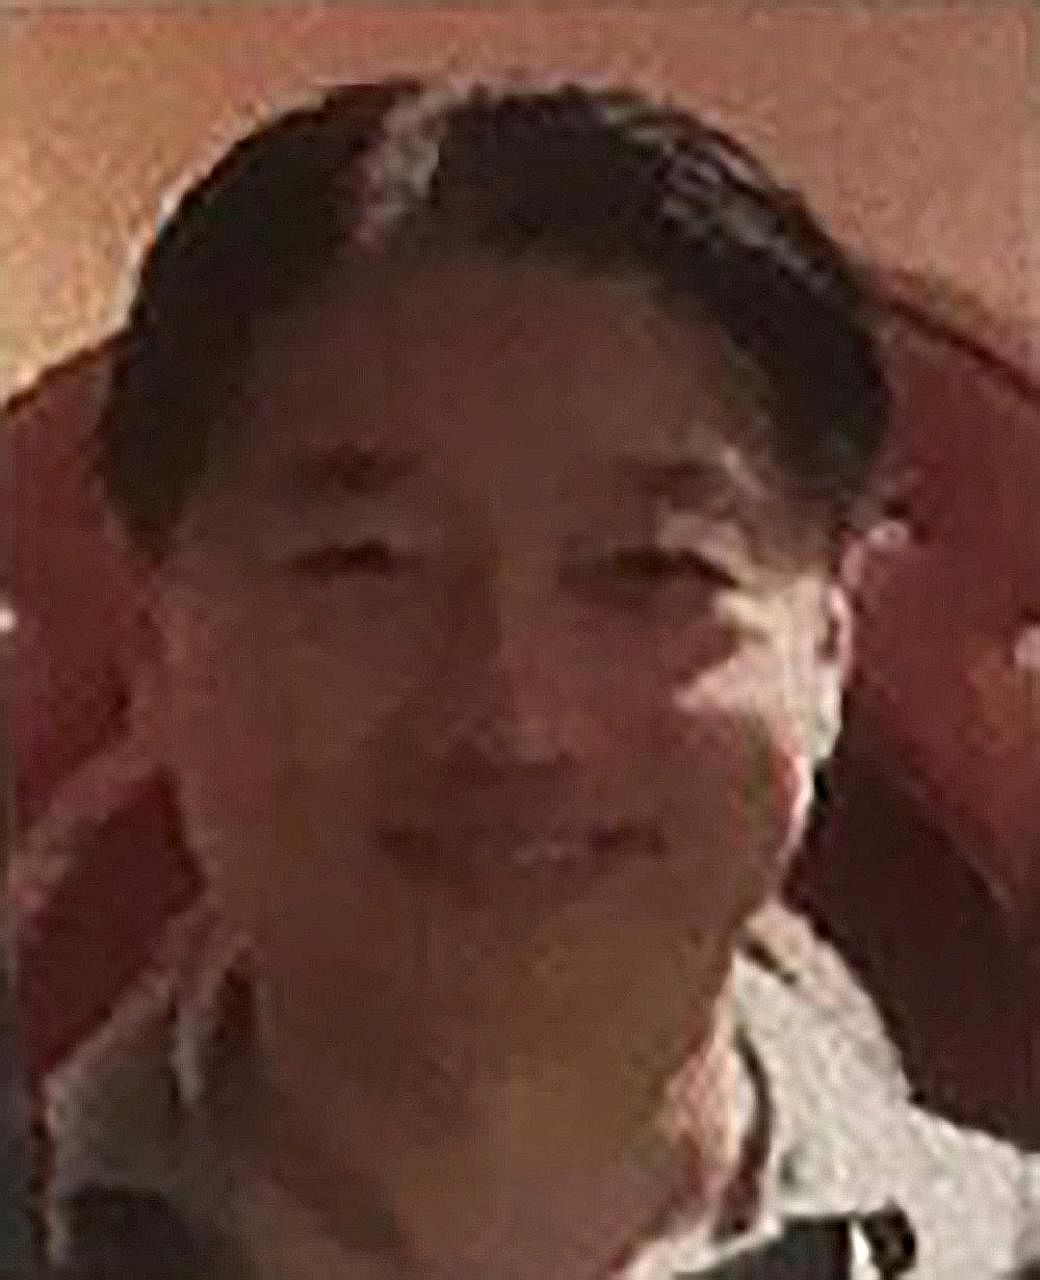 Mr Tse Chi Lop, a Canadian national born in China, is suspected of leading the Sam Gor syndicate, a vast multinational drug ring formed out of an alliance of five Asian triad groups, according to law enforcement officials. Right: Bags of methamphetam